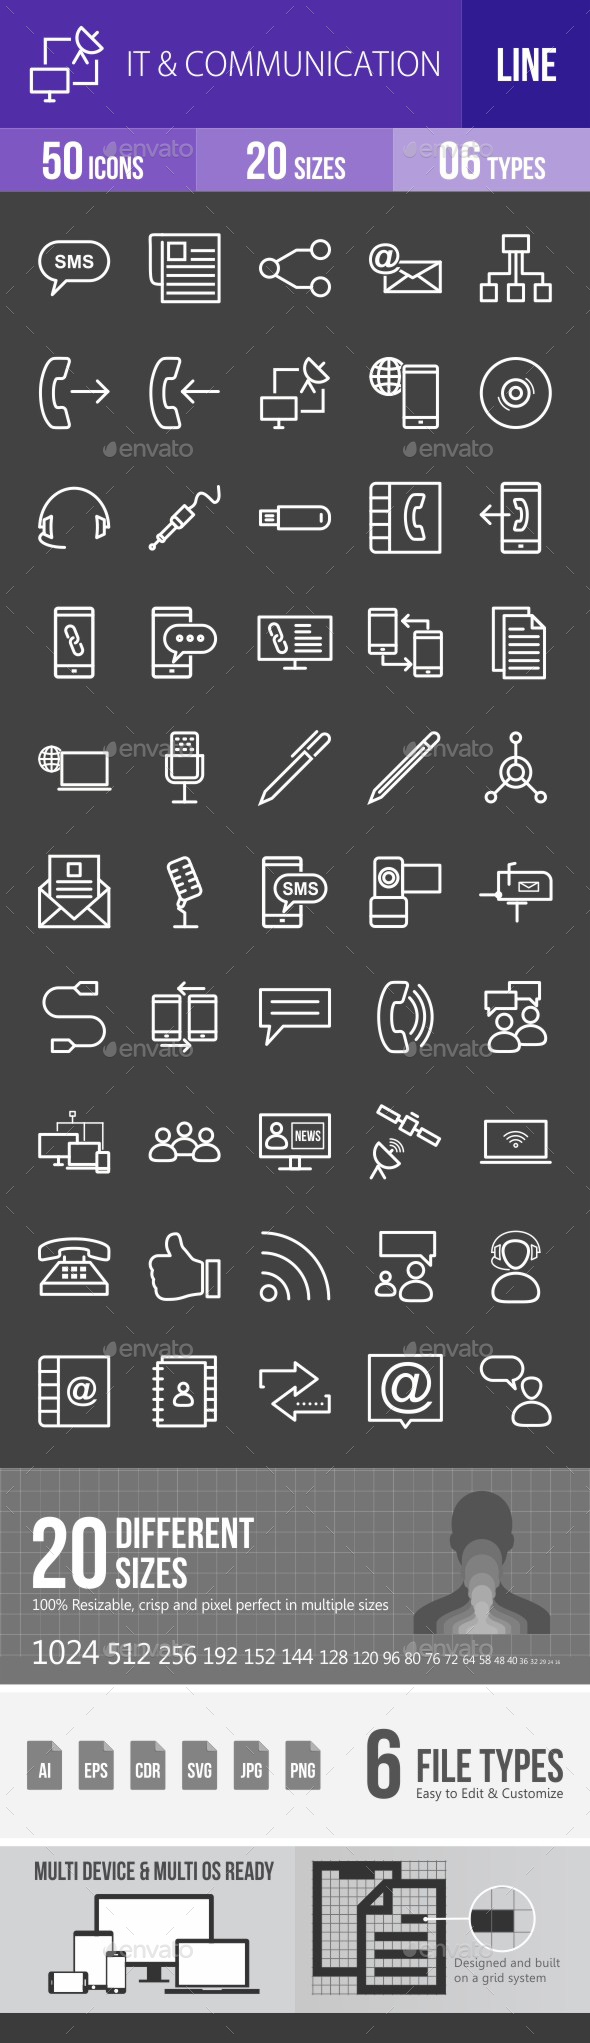 IT & Communication Line Inverted Icons